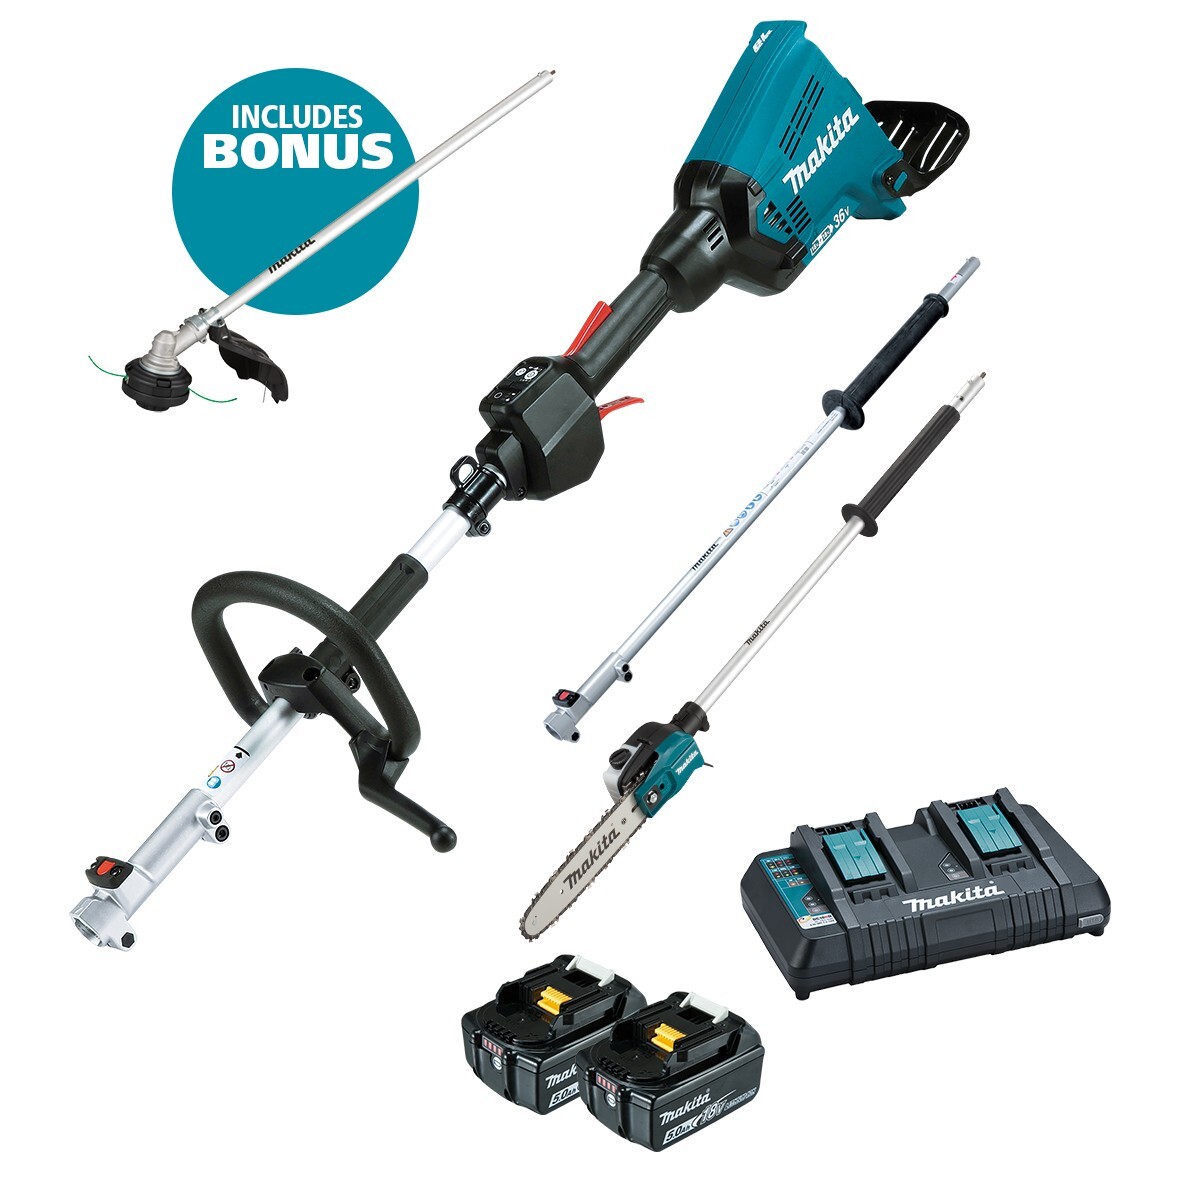 Makita 18Vx2 Brushless Multi-Function Power Head with Attachments 5.0Ah Kit